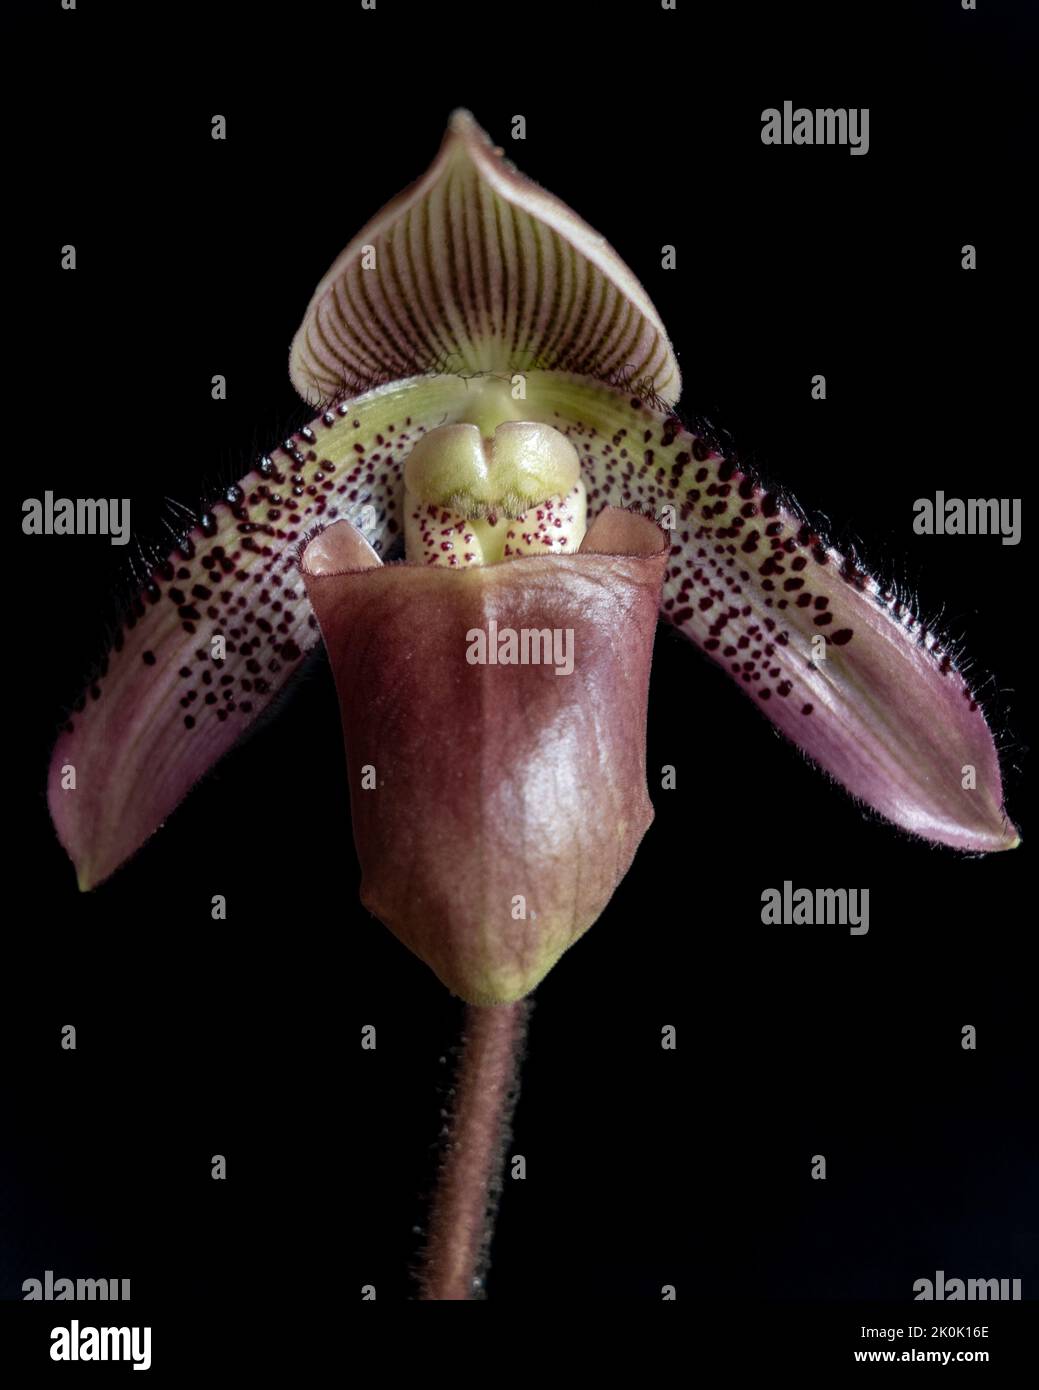 Closeup front view of colorful purple red flower of lady slipper orchid species paphiopedilum superbiens on black background Stock Photo